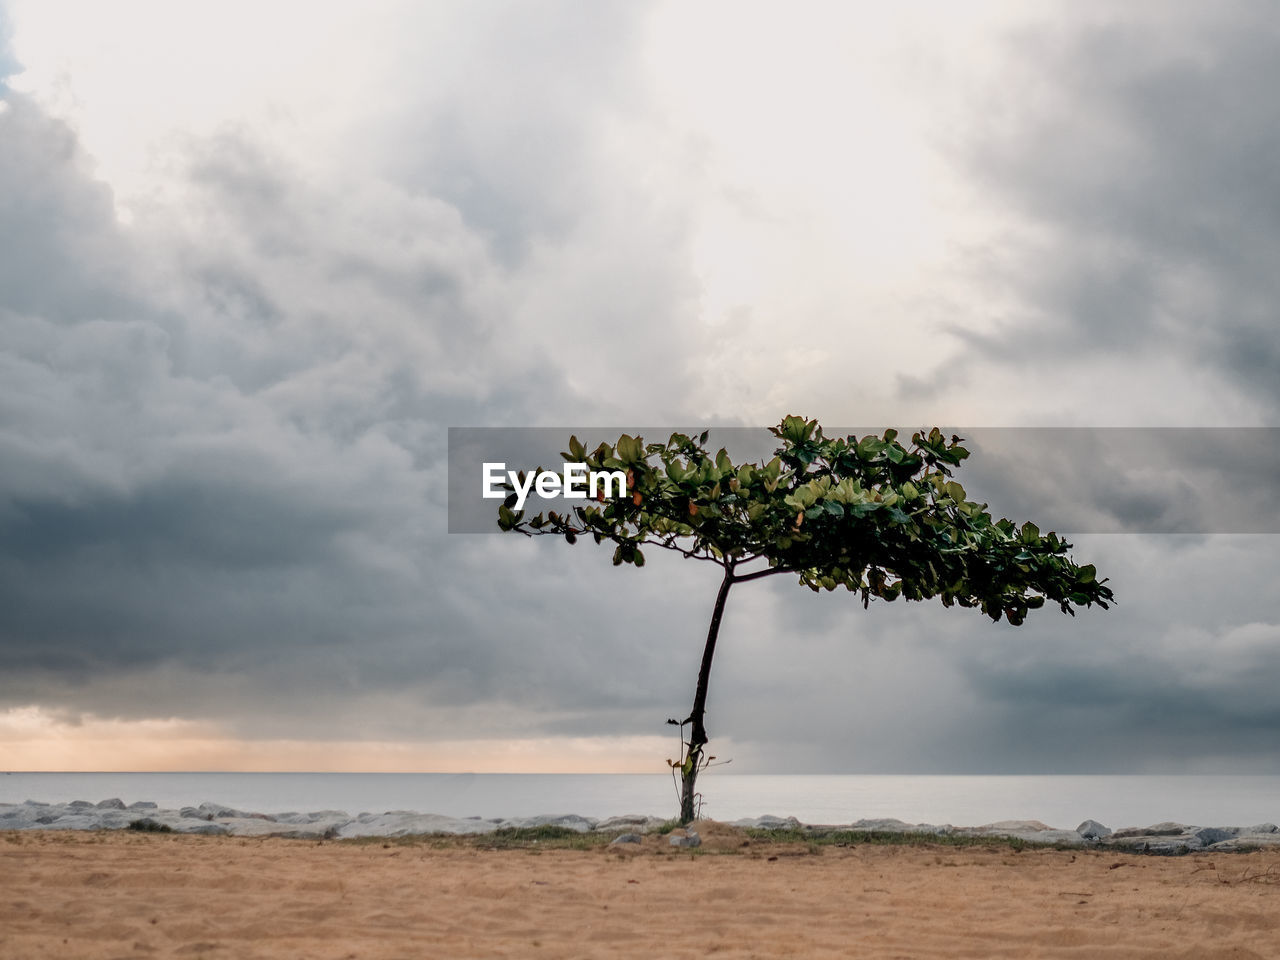 A solo tree on a beach against clouds